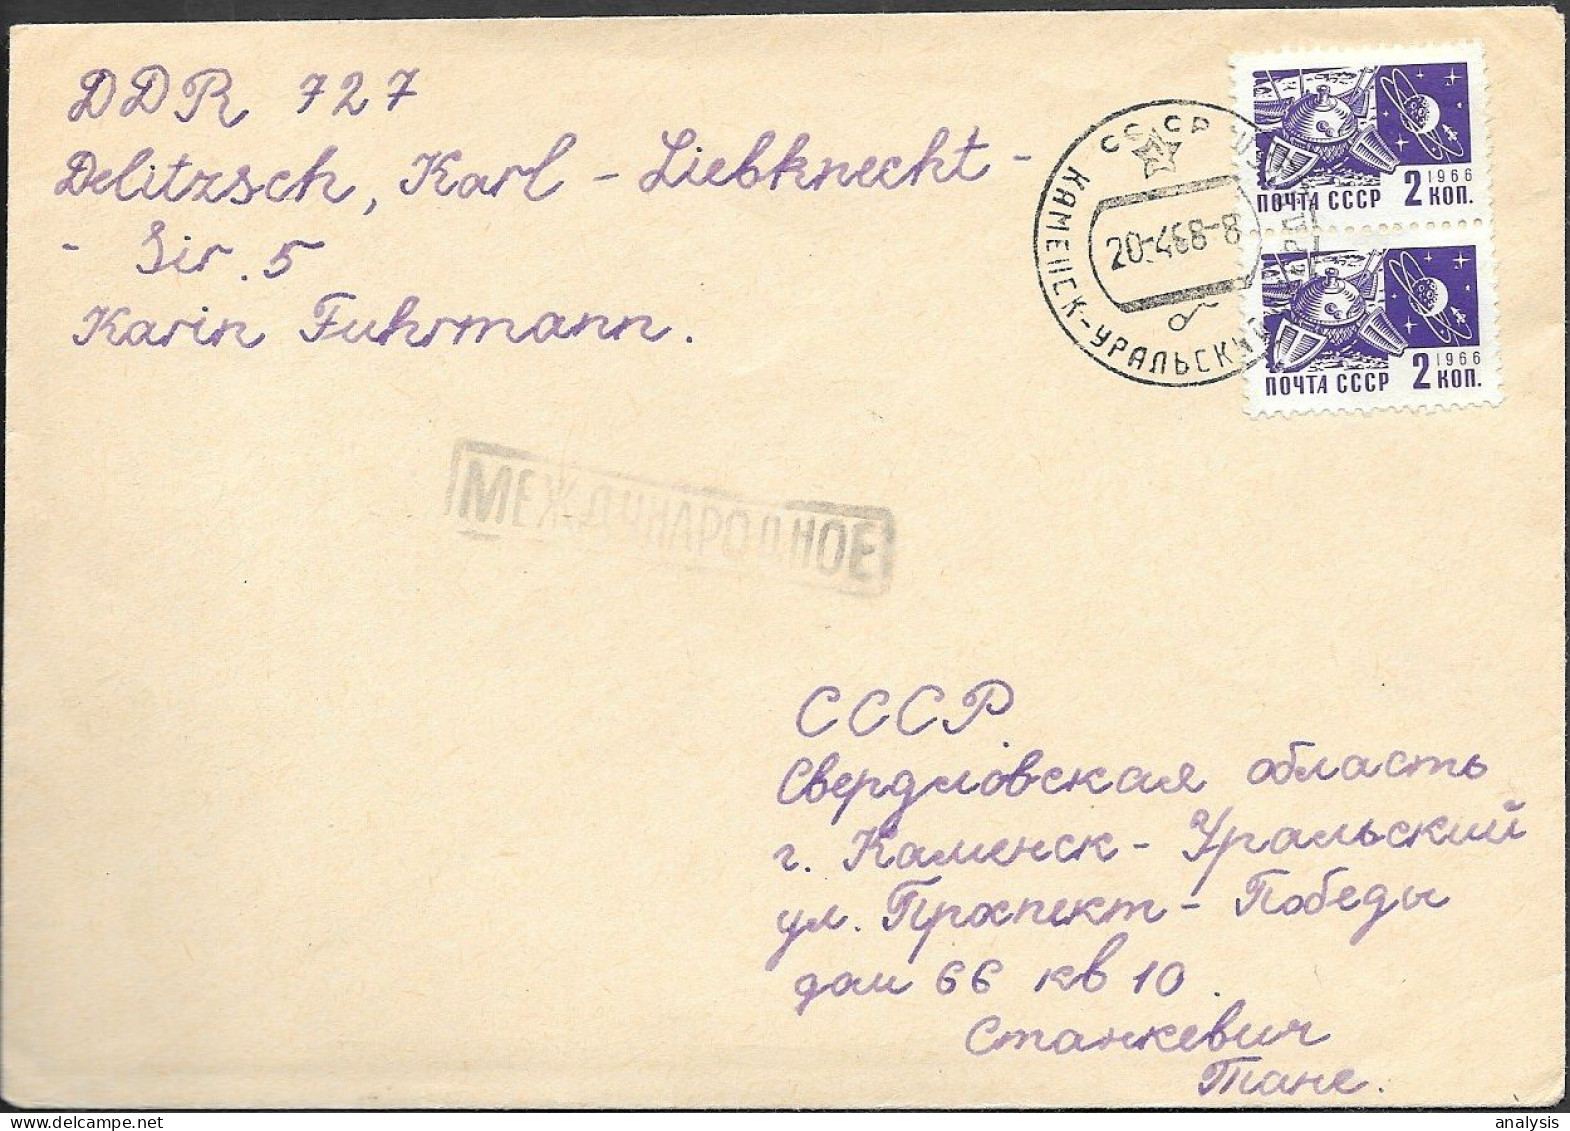 Russia Cover Mailed 1968 W/ Space Stamps Moon Probe "Luna 9" - Russia & USSR